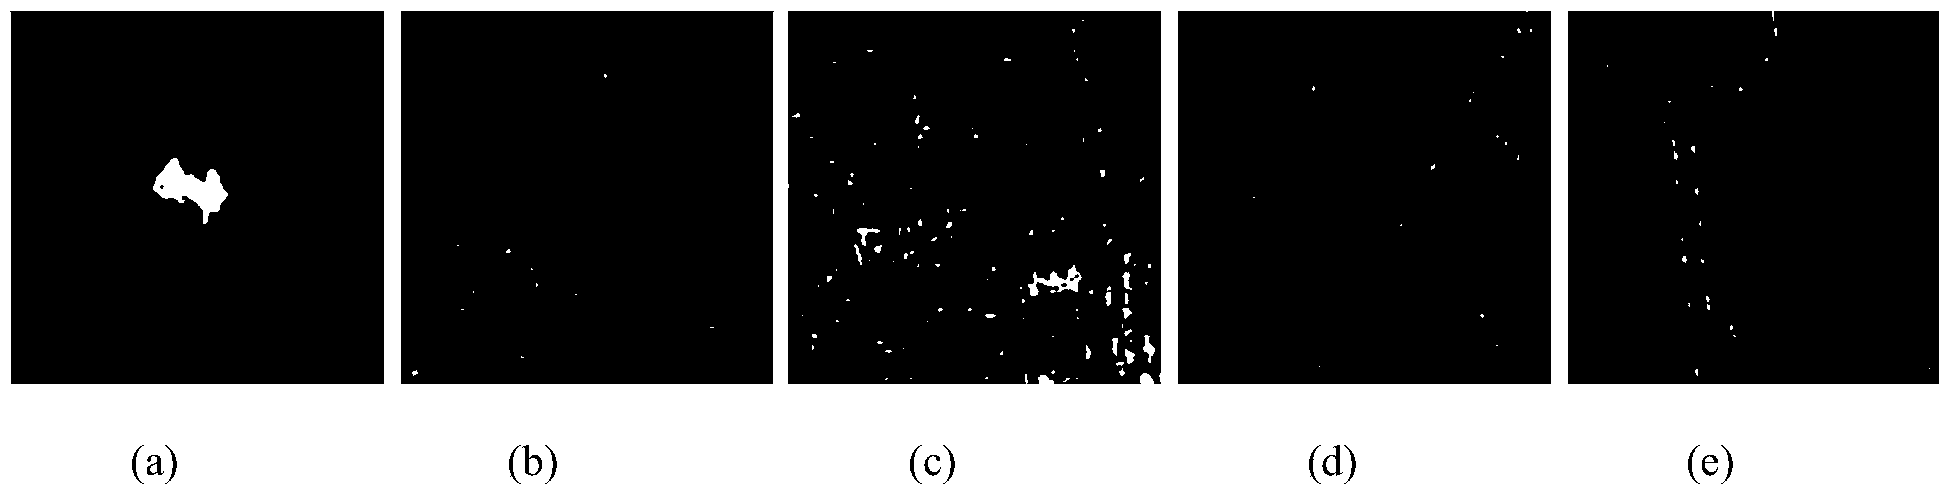 Multi-scale fuzzy measure and semi-supervised learning based SAR (Synthetic Aperture Radar) image identification method